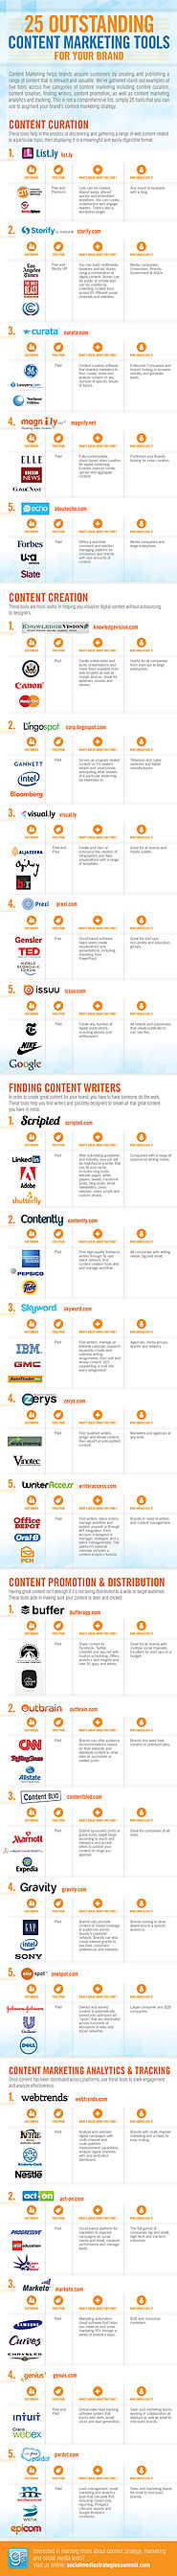 25 Content Marketing Tools for Curation, Creation, Promotion & Distribution [Infographic]